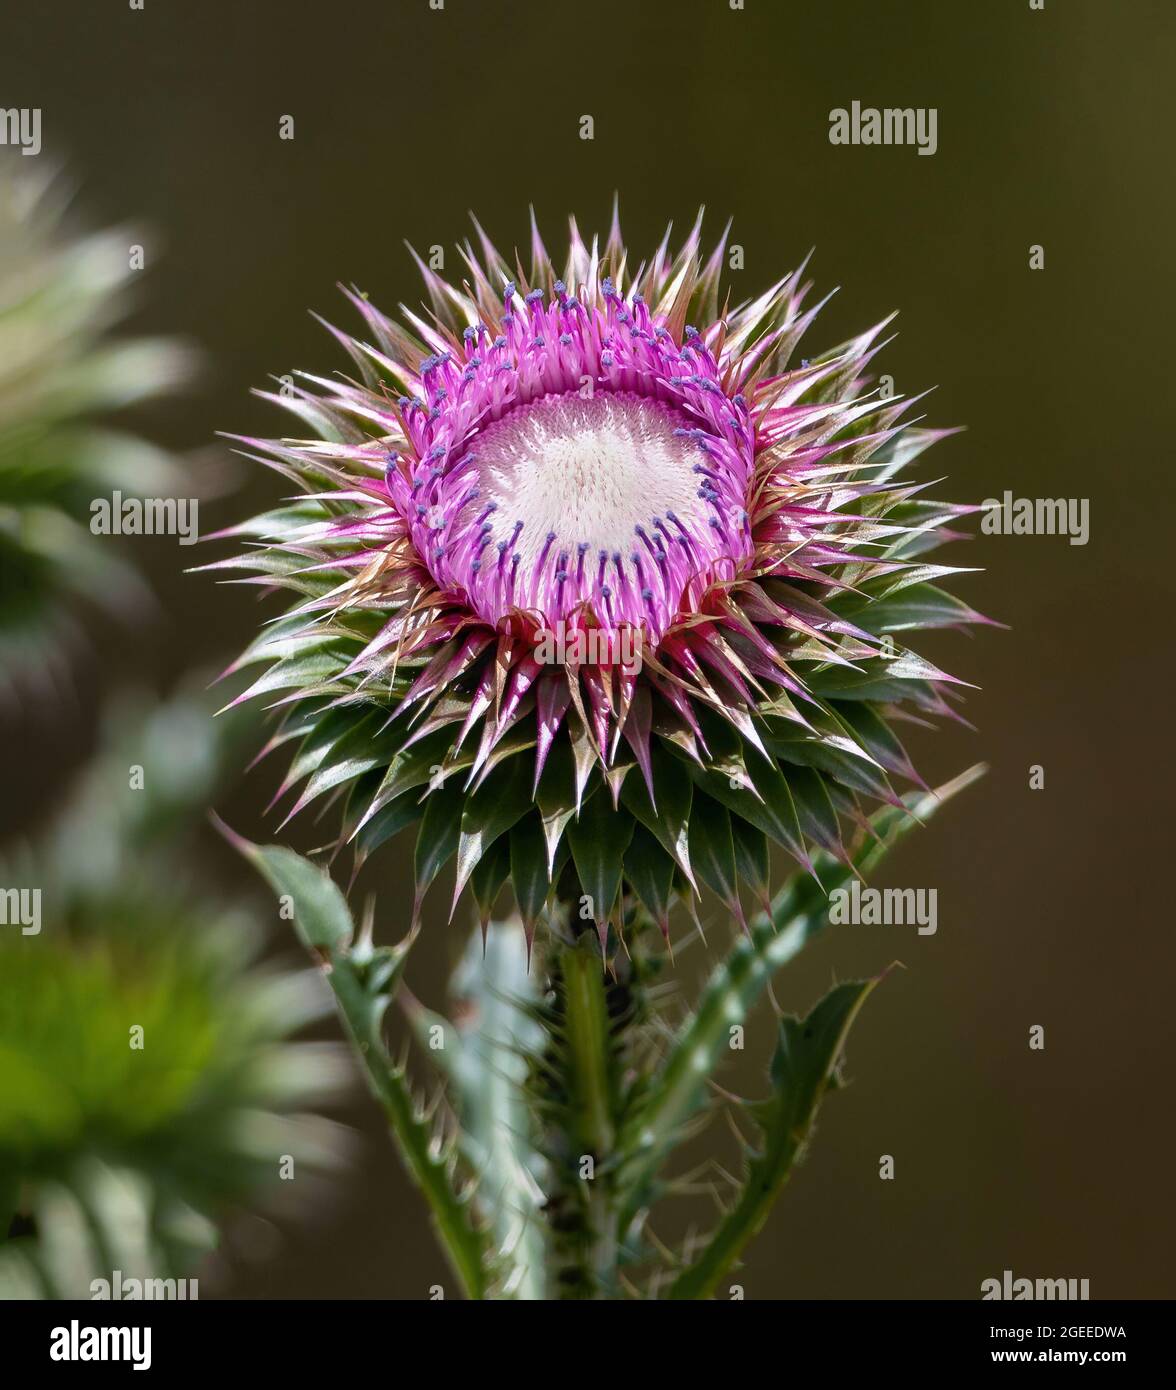 Musk Thistle flower head, close up, showing inner seeds and structure in the early flowering stage. Stock Photo